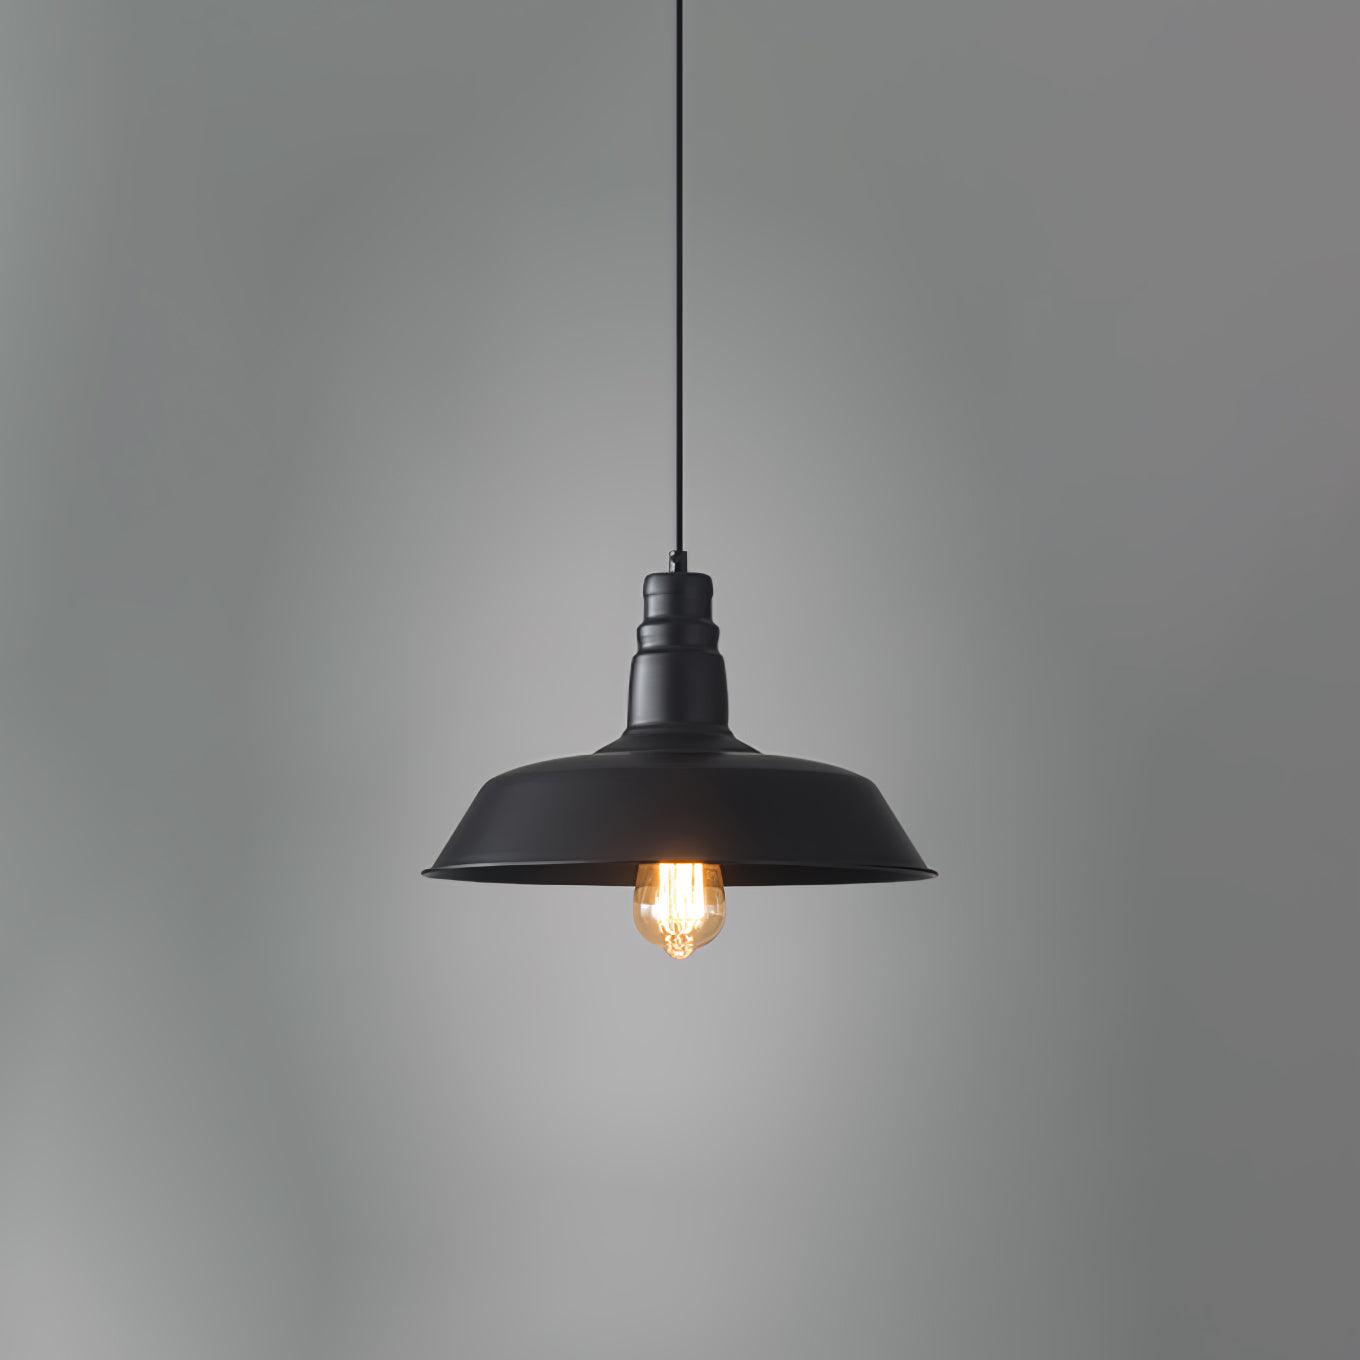 Vintage Industrial Collections Pendant Light